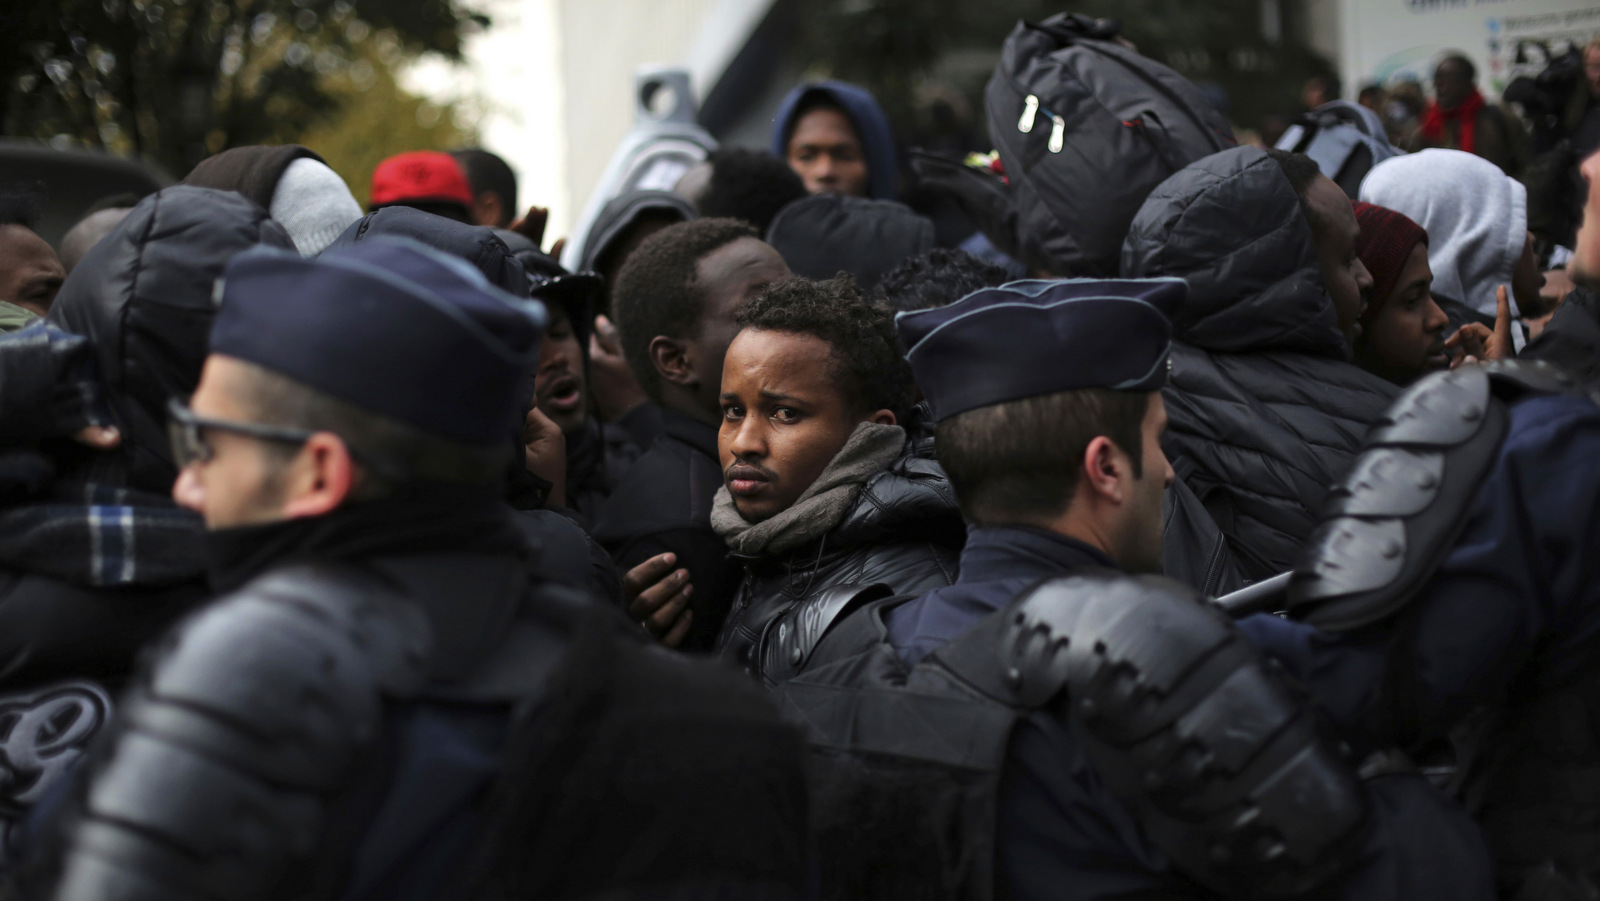 Migrants are pushed back by police officers as they wait to board buses to temporary shelters in Paris, Friday, Nov. 4, 2016. (AP/Thibault Camus)